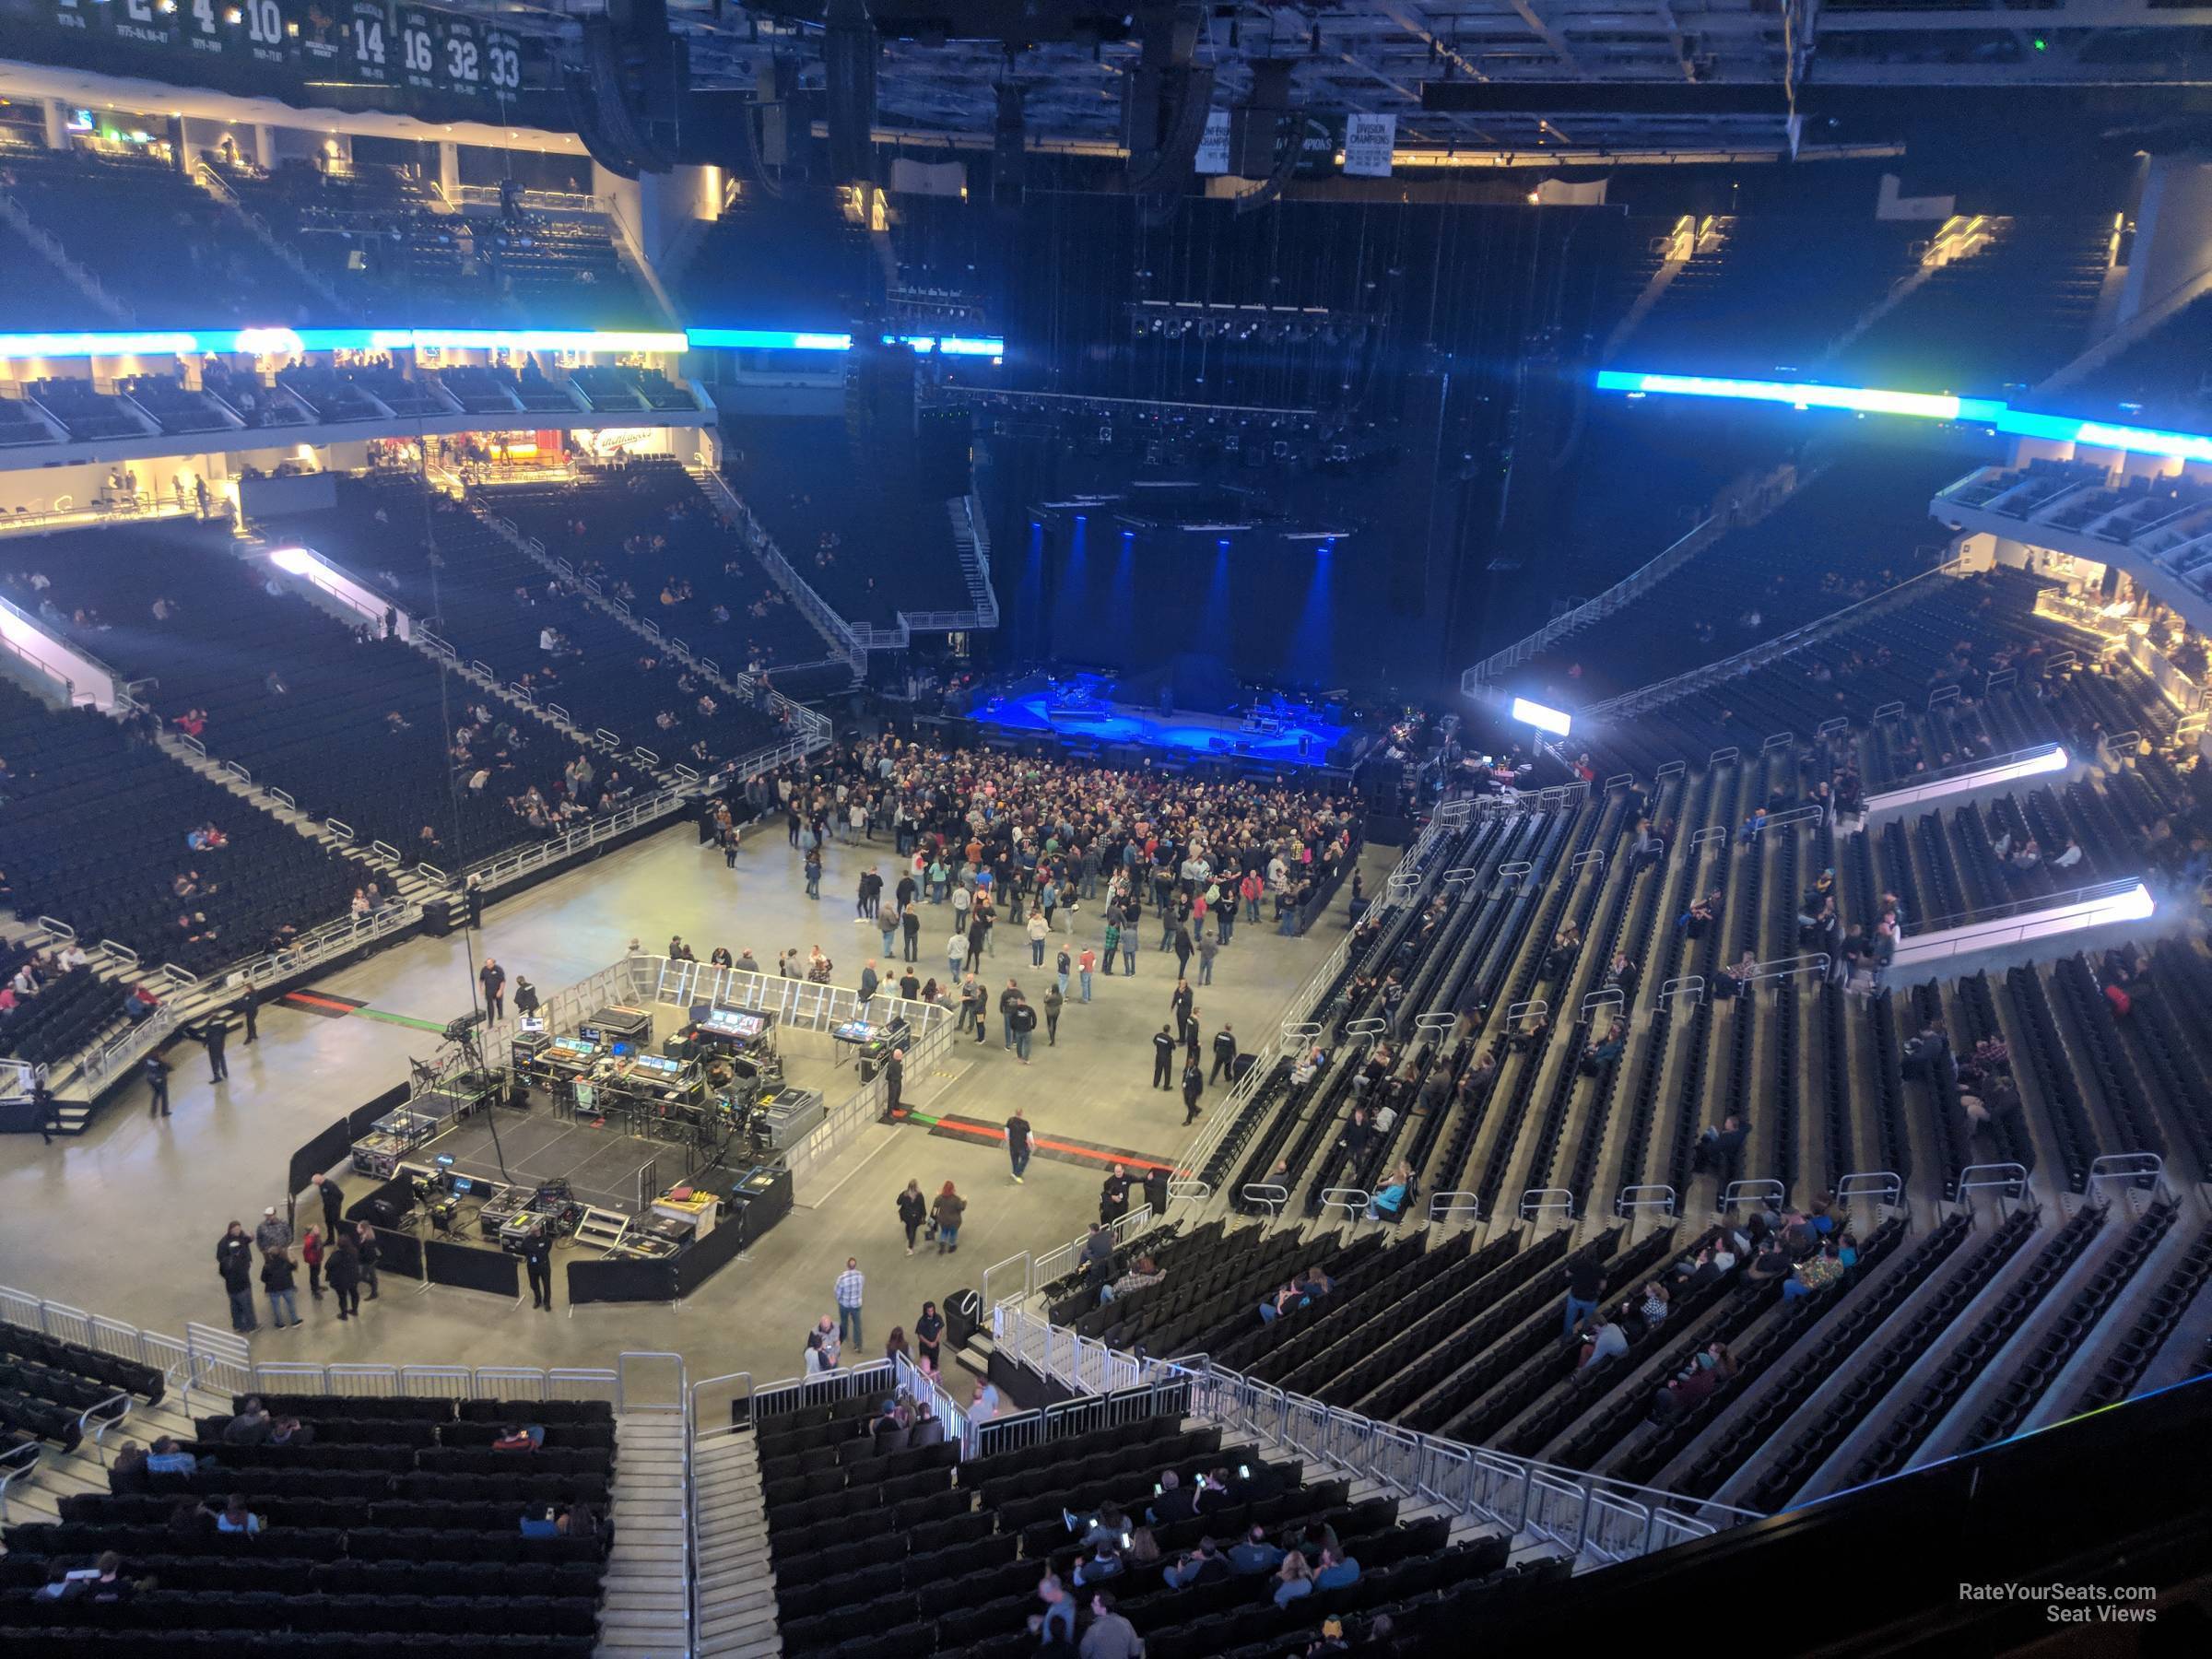 section 227, row 3 seat view  for concert - fiserv forum